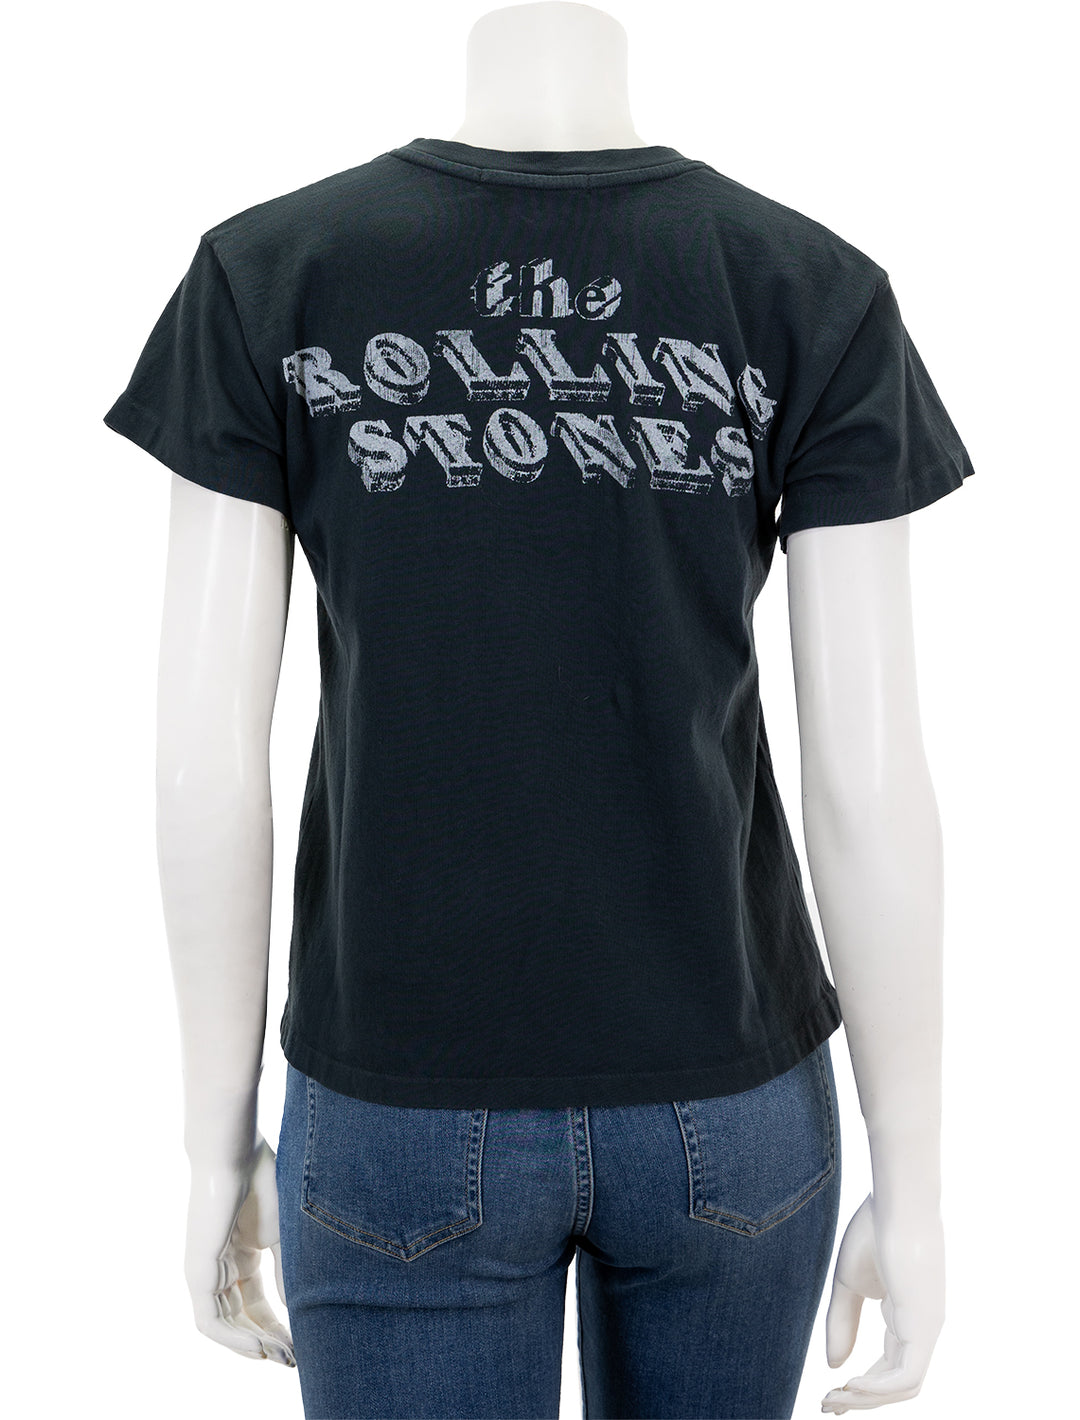 Back view of Daydreamer's rolling stones ticket fill tongue tour tee.